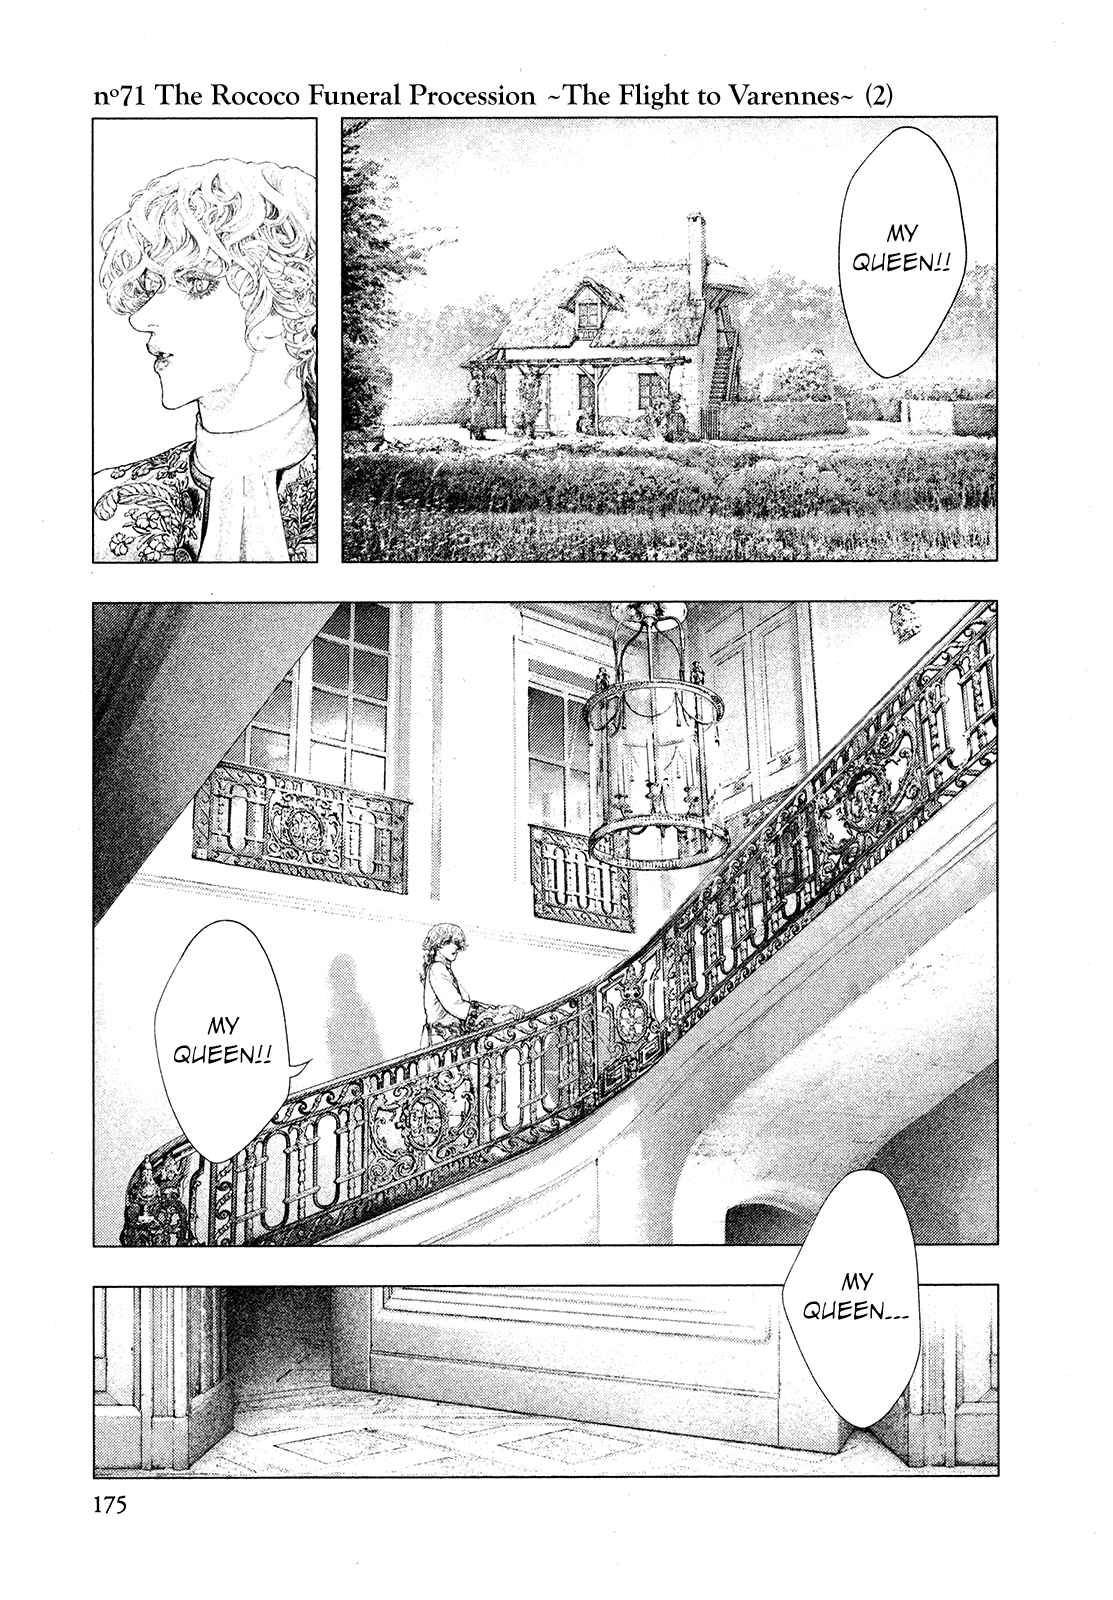 Innocent Rouge Vol.10-Chapter.71-The-Rococo-Funeral-Procession-~The-Flight-to-Varennes~-(2) Image